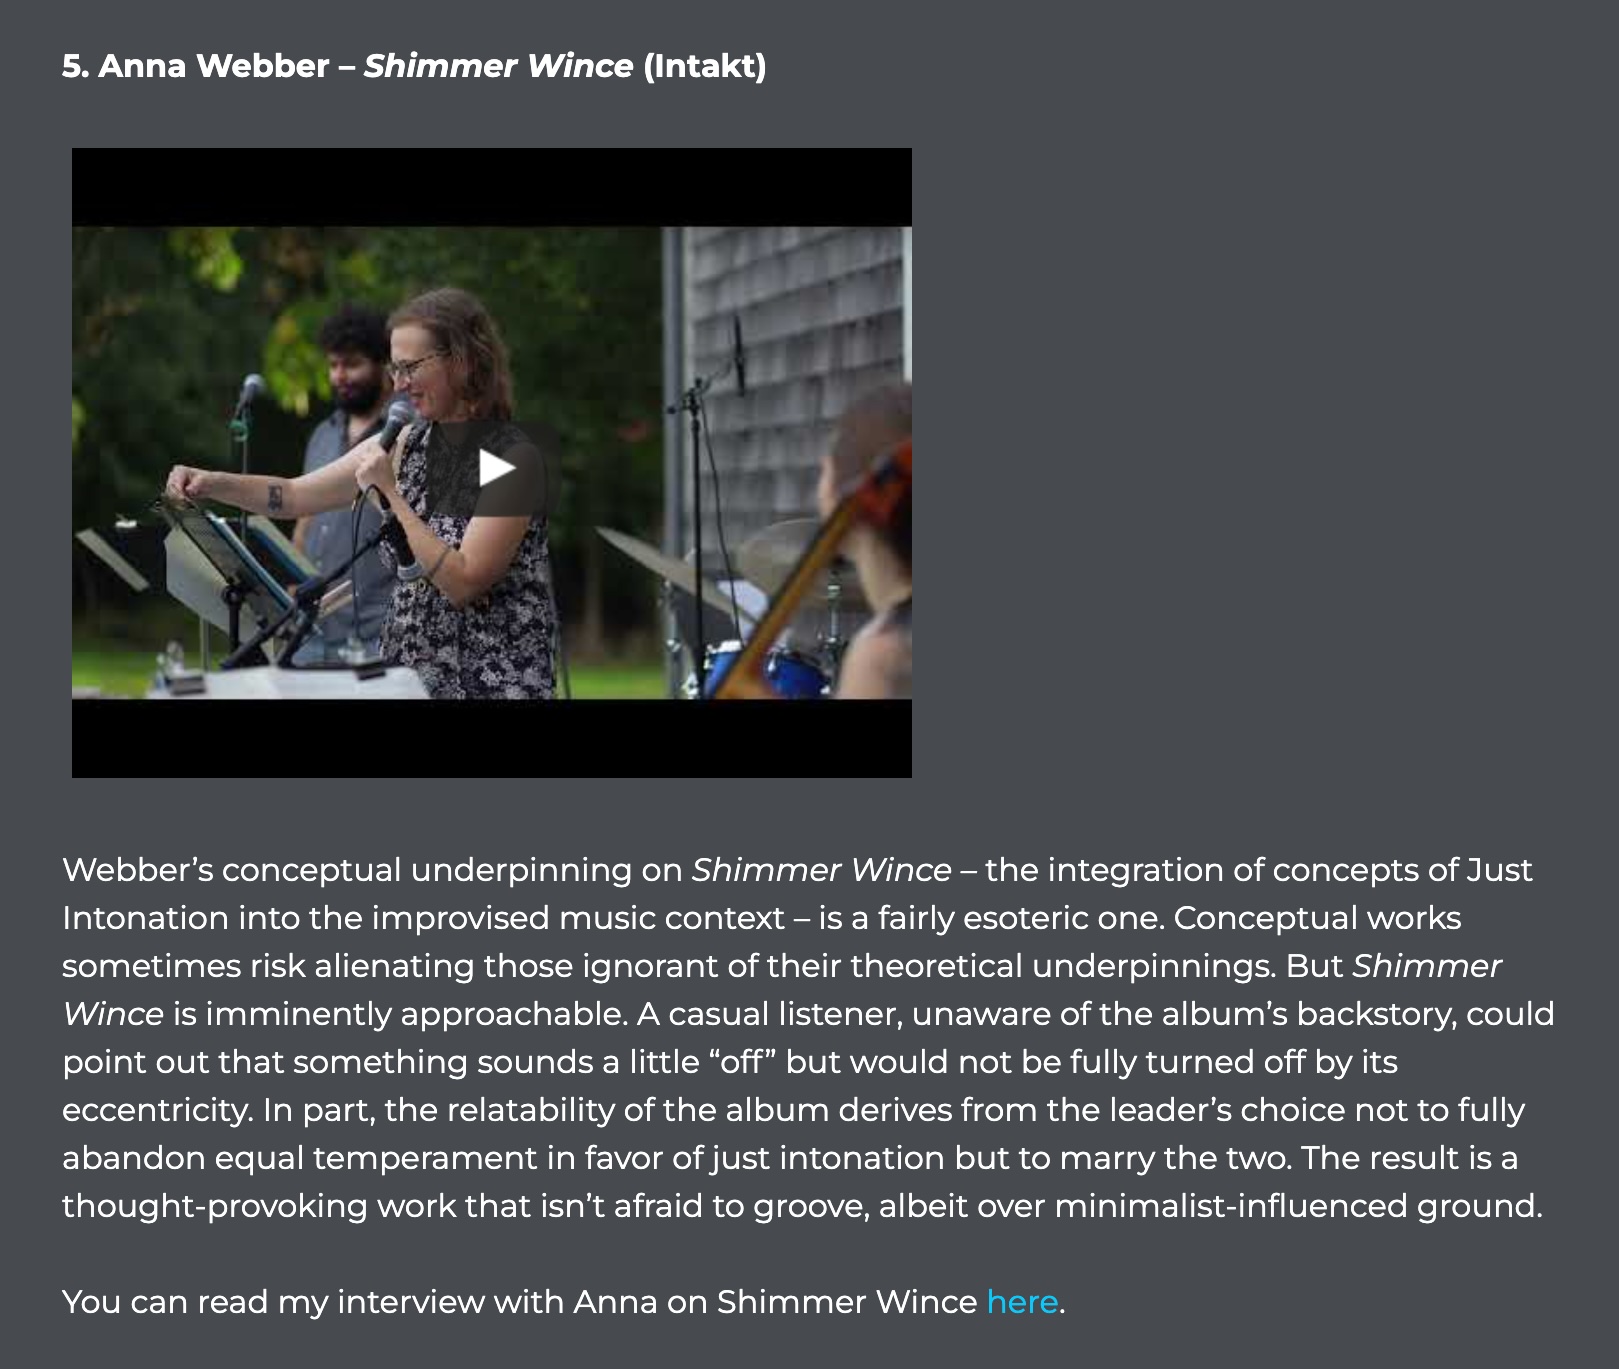 Webber’s conceptual underpinning on Shimmer Wince – the integration of concepts of Just Intonation into the improvised music context – is a fairly esoteric one. Conceptual works sometimes risk alienating those ignorant of their theoretical underpinnings. But Shimmer Wince is imminently approachable. A casual listener, unaware of the album’s backstory, could point out that something sounds a little “off” but would not be fully turned off by its eccentricity. In part, the relatability of the album derives from the leader’s choice not to fully abandon equal temperament in favor of just intonation but to marry the two. The result is a thought-provoking work that isn’t afraid to groove, albeit over minimalist-influenced ground.